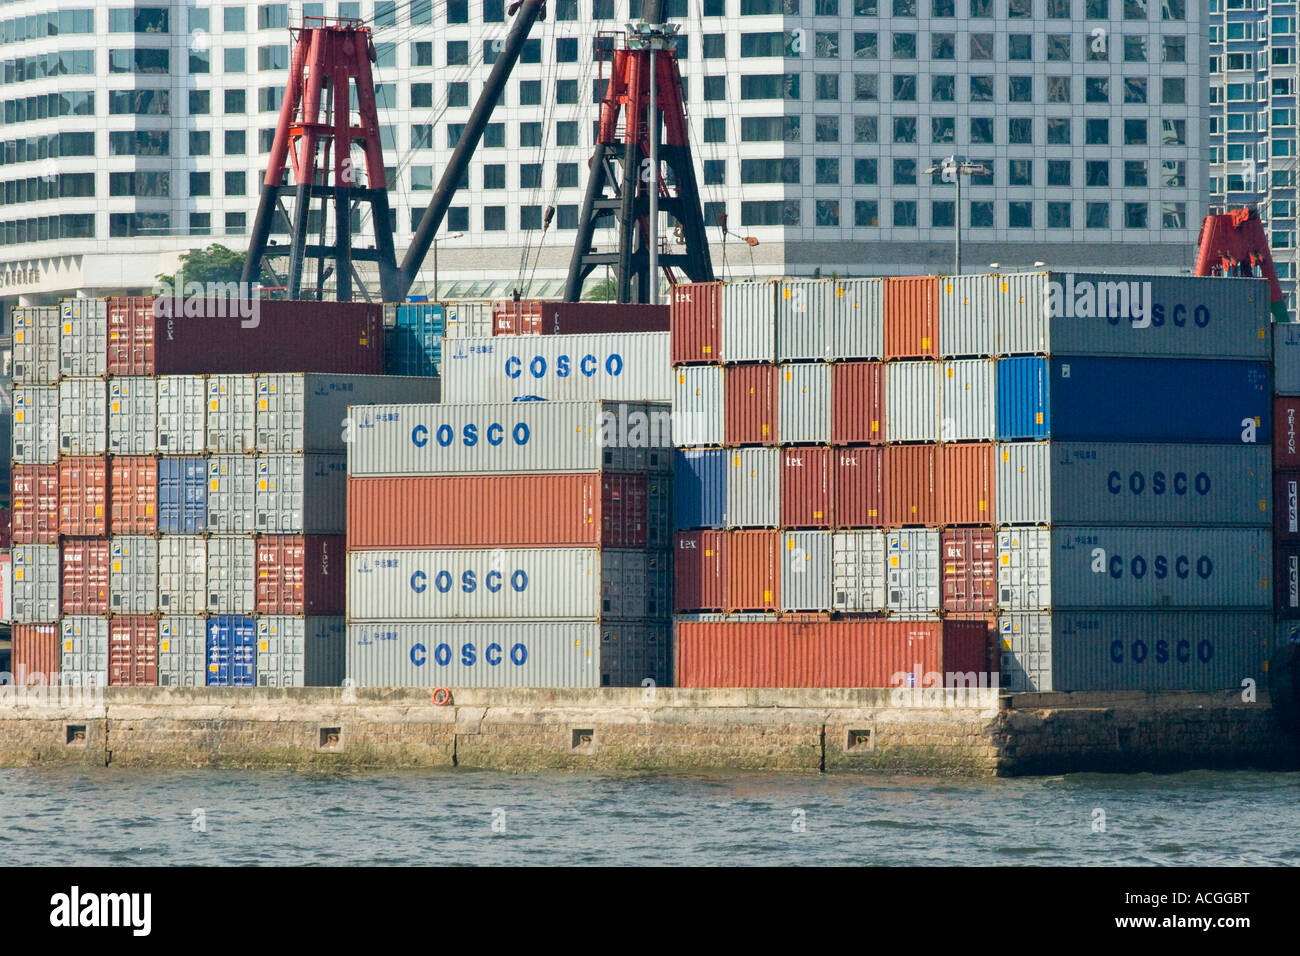 Cosco Shipping Containers Victoria Kowloon Victoria Harbour Hong Kong SAR Stock Photo